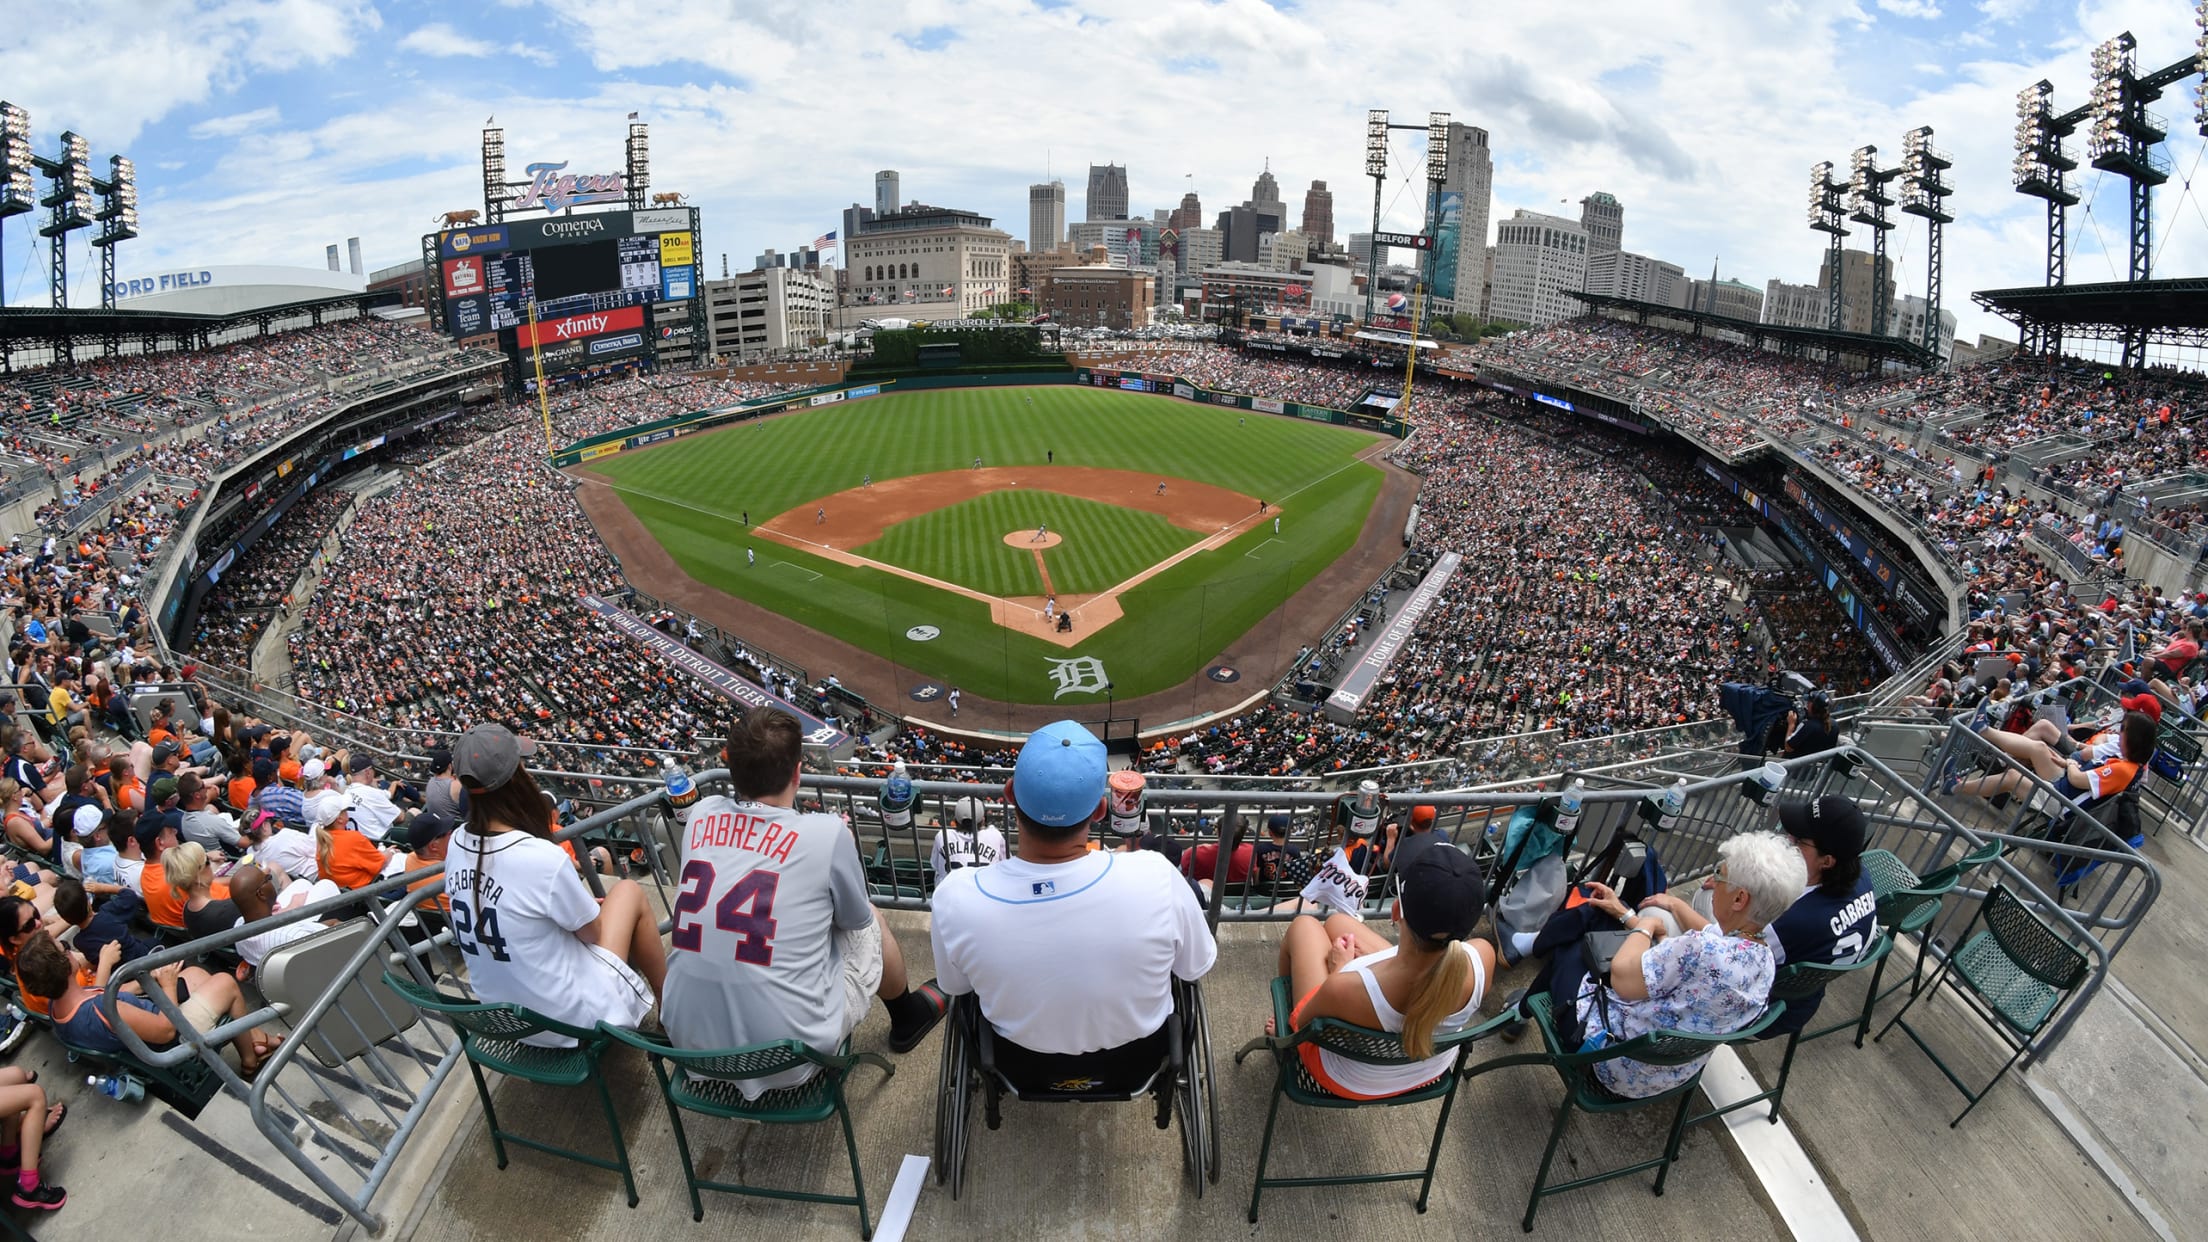 Detroit Tigers on X: RT @ComericaPark: Check in: Who got an